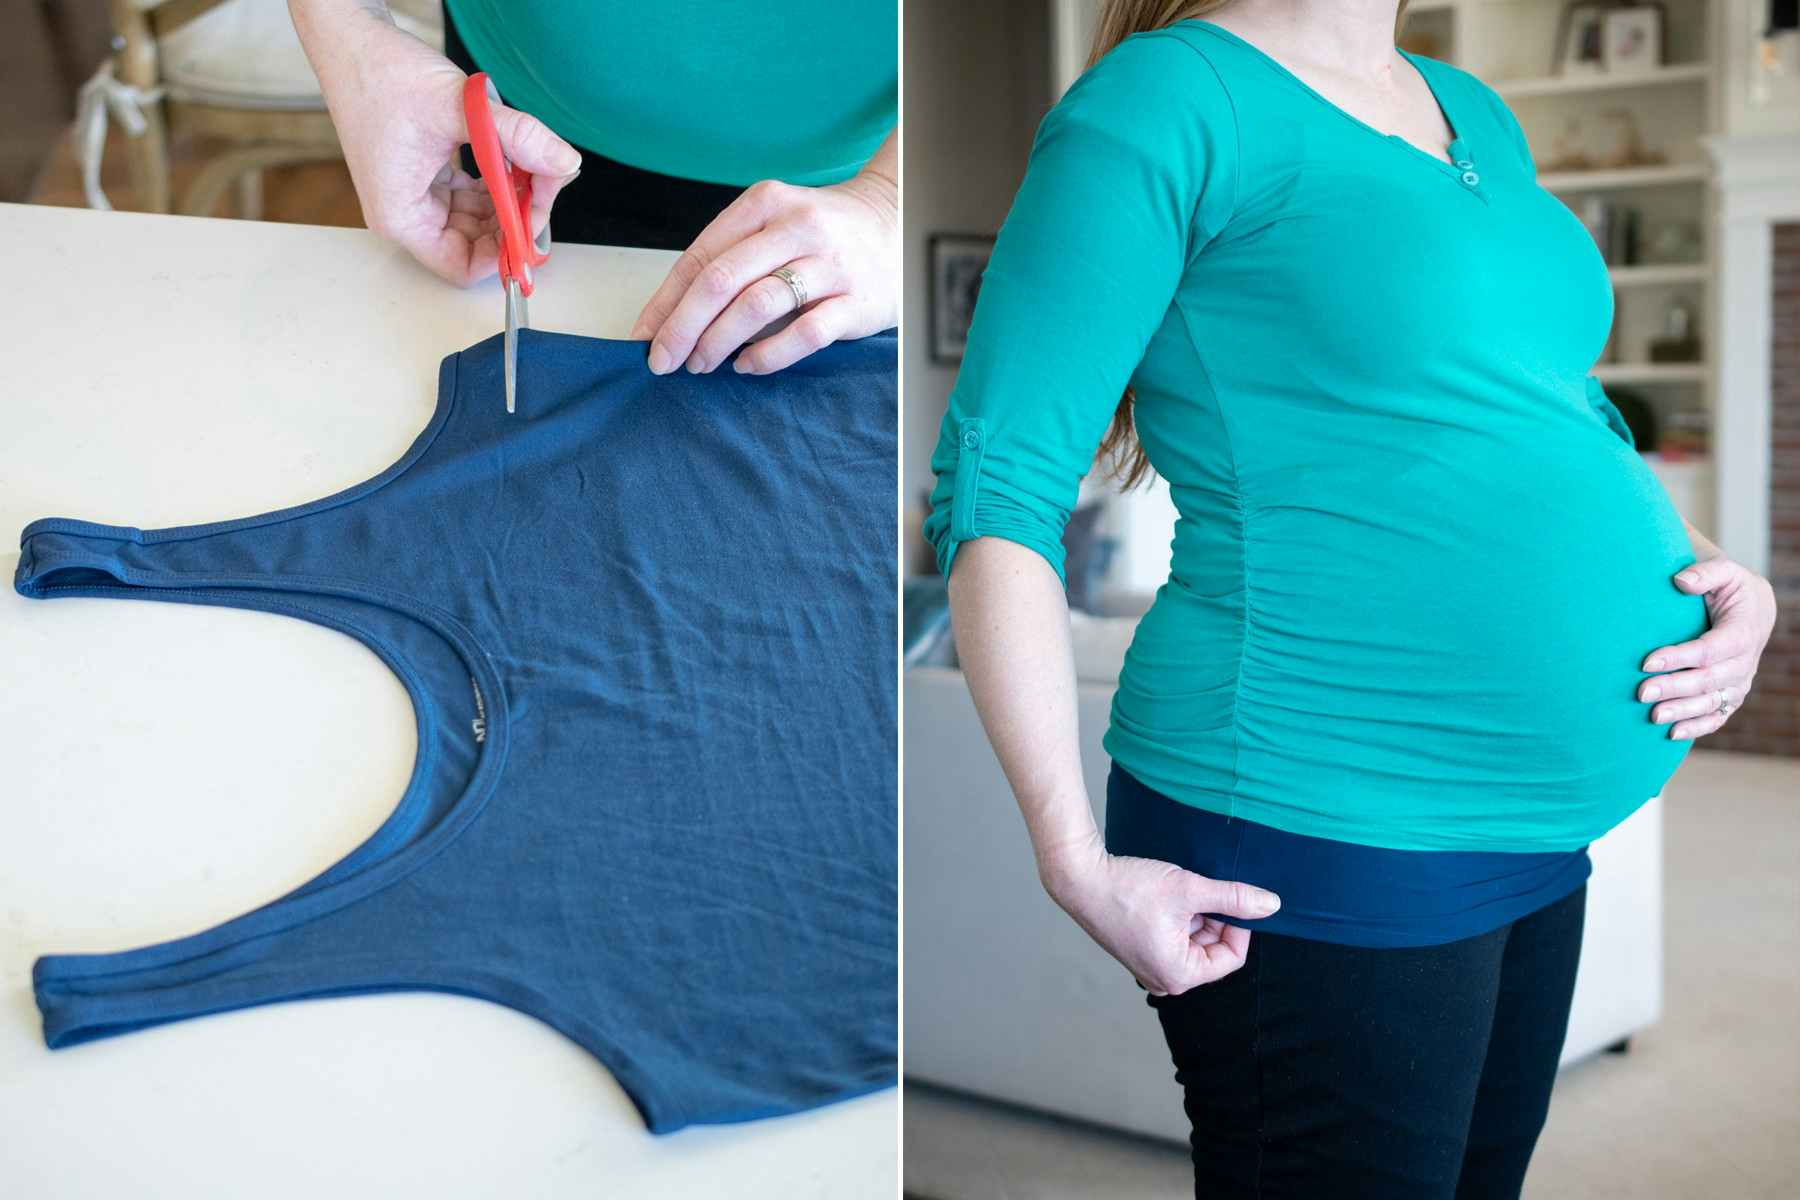 A pregnant woman cutting a tank top and wearing part of a tank top under another shirt.